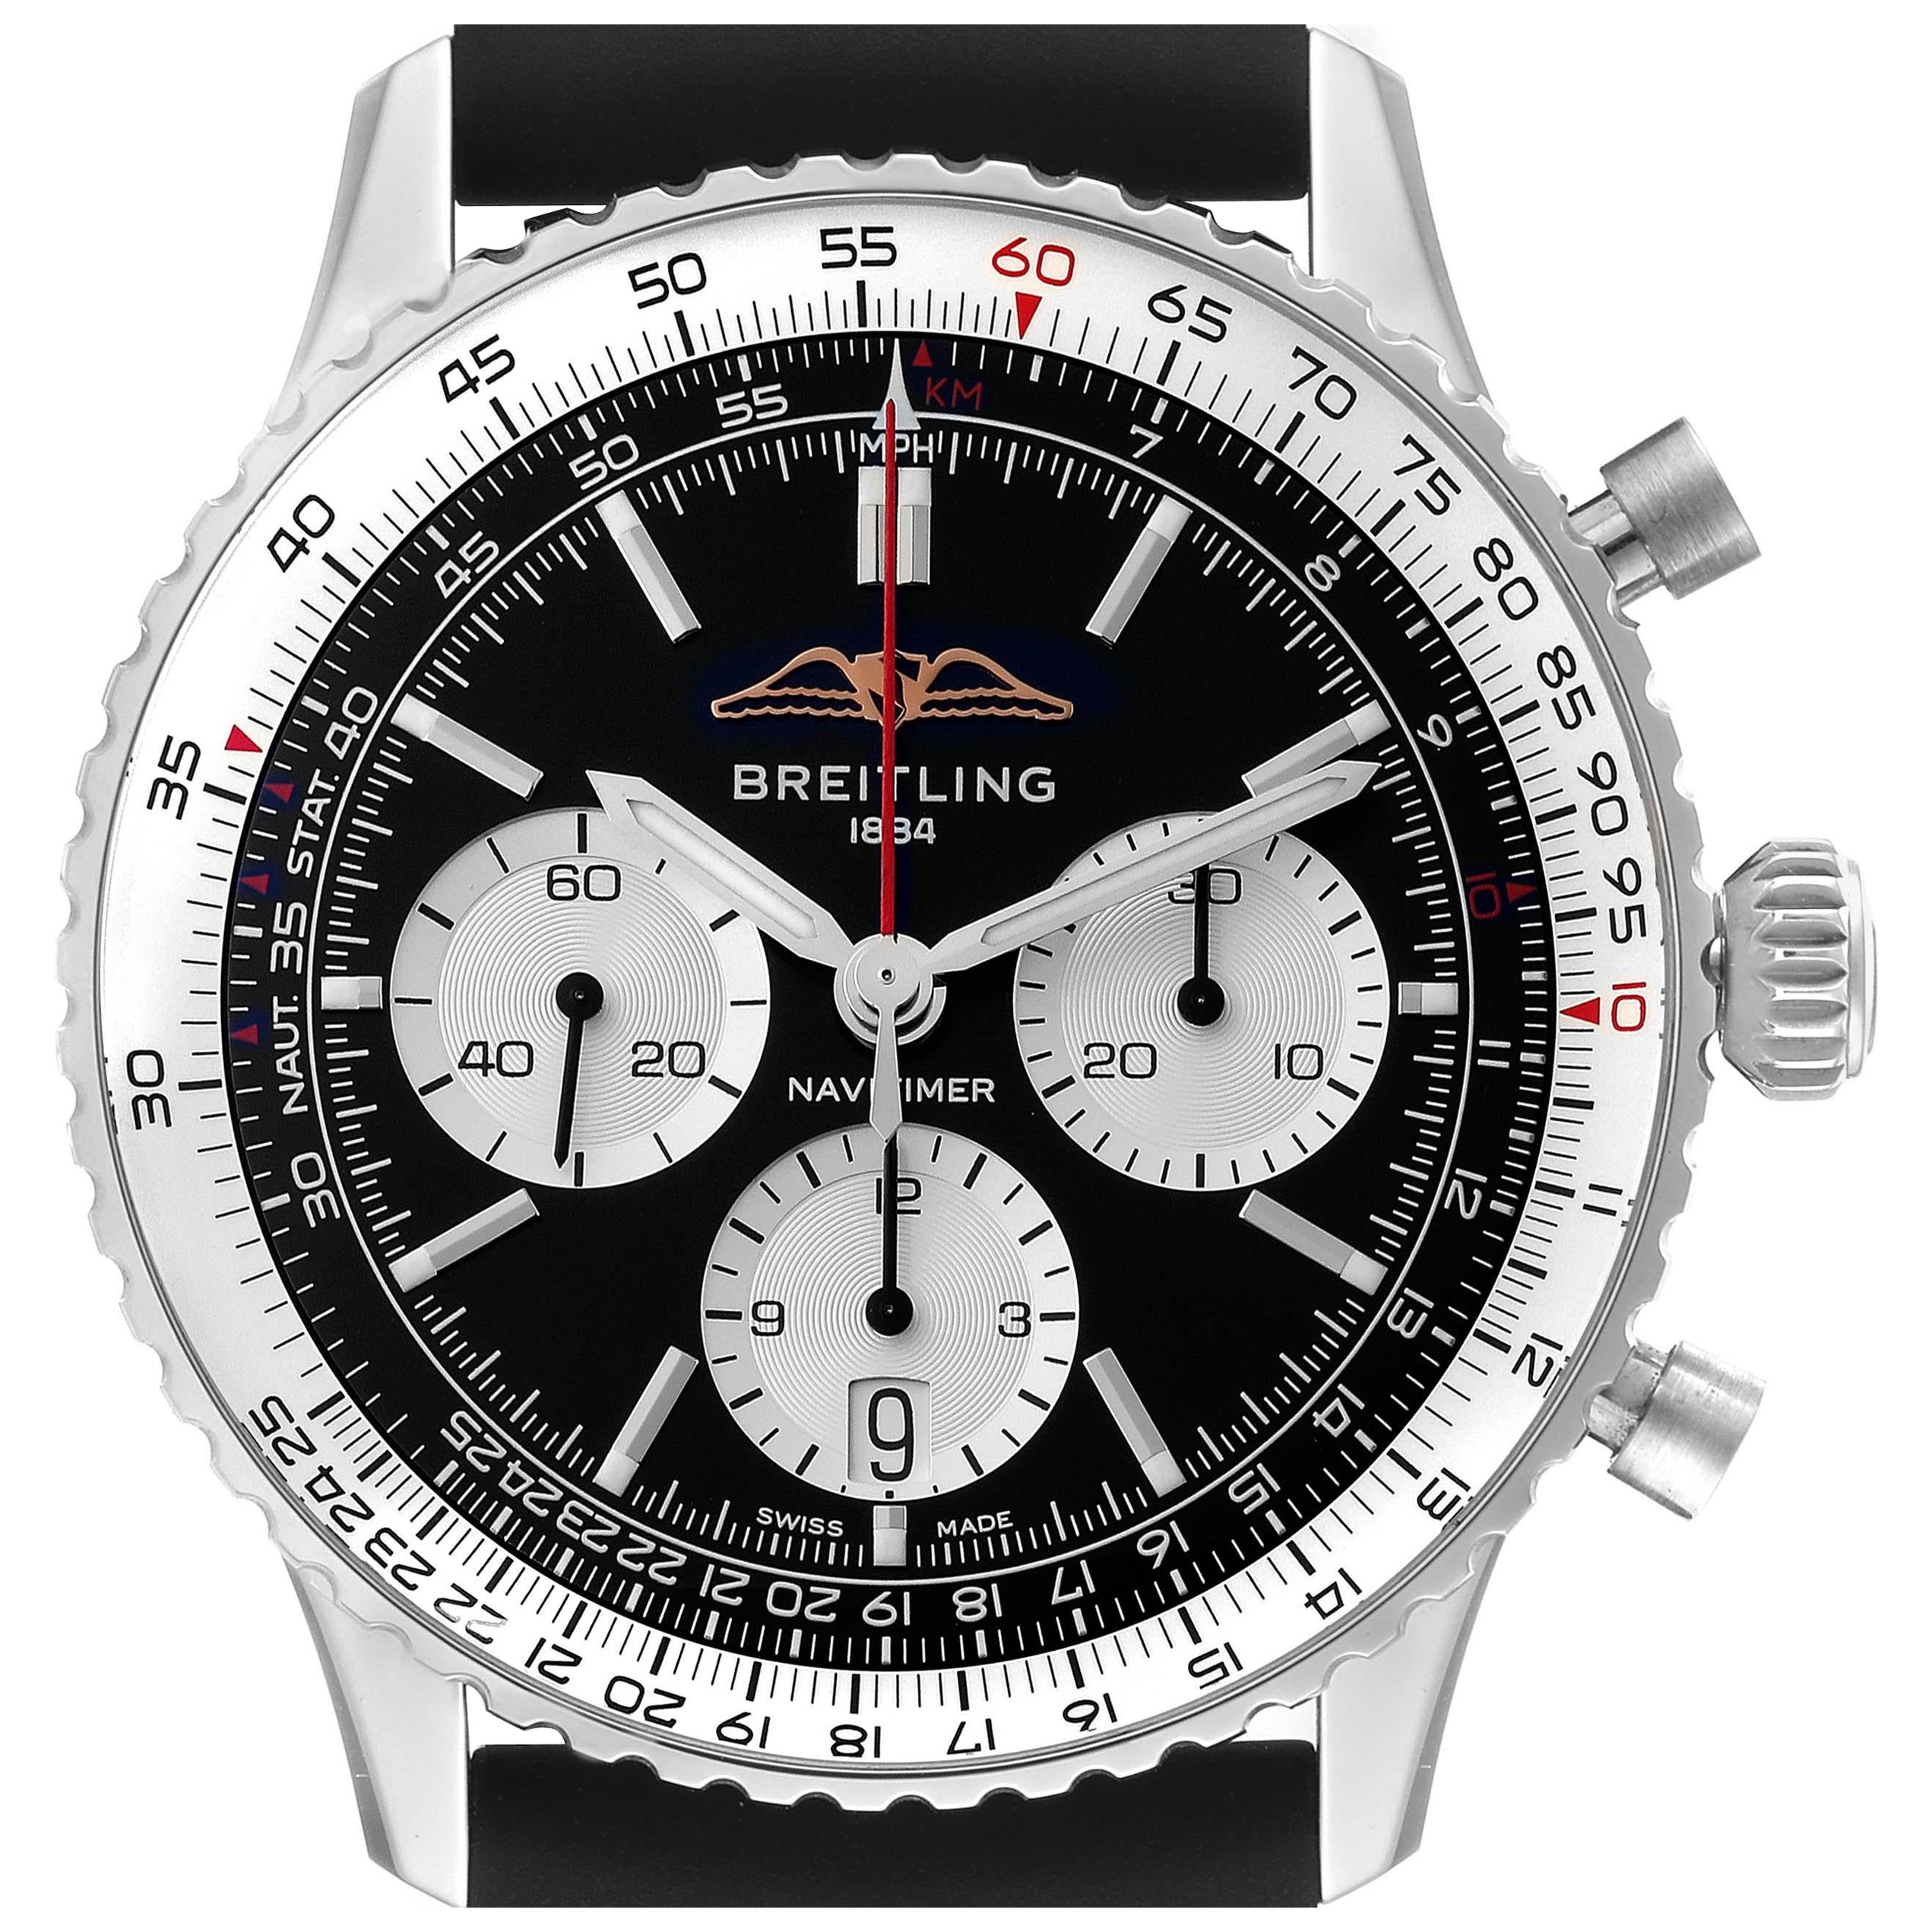 Breitling Navitimer B01 Black Dial Steel Mens Watch AB0138 Box Card For Sale